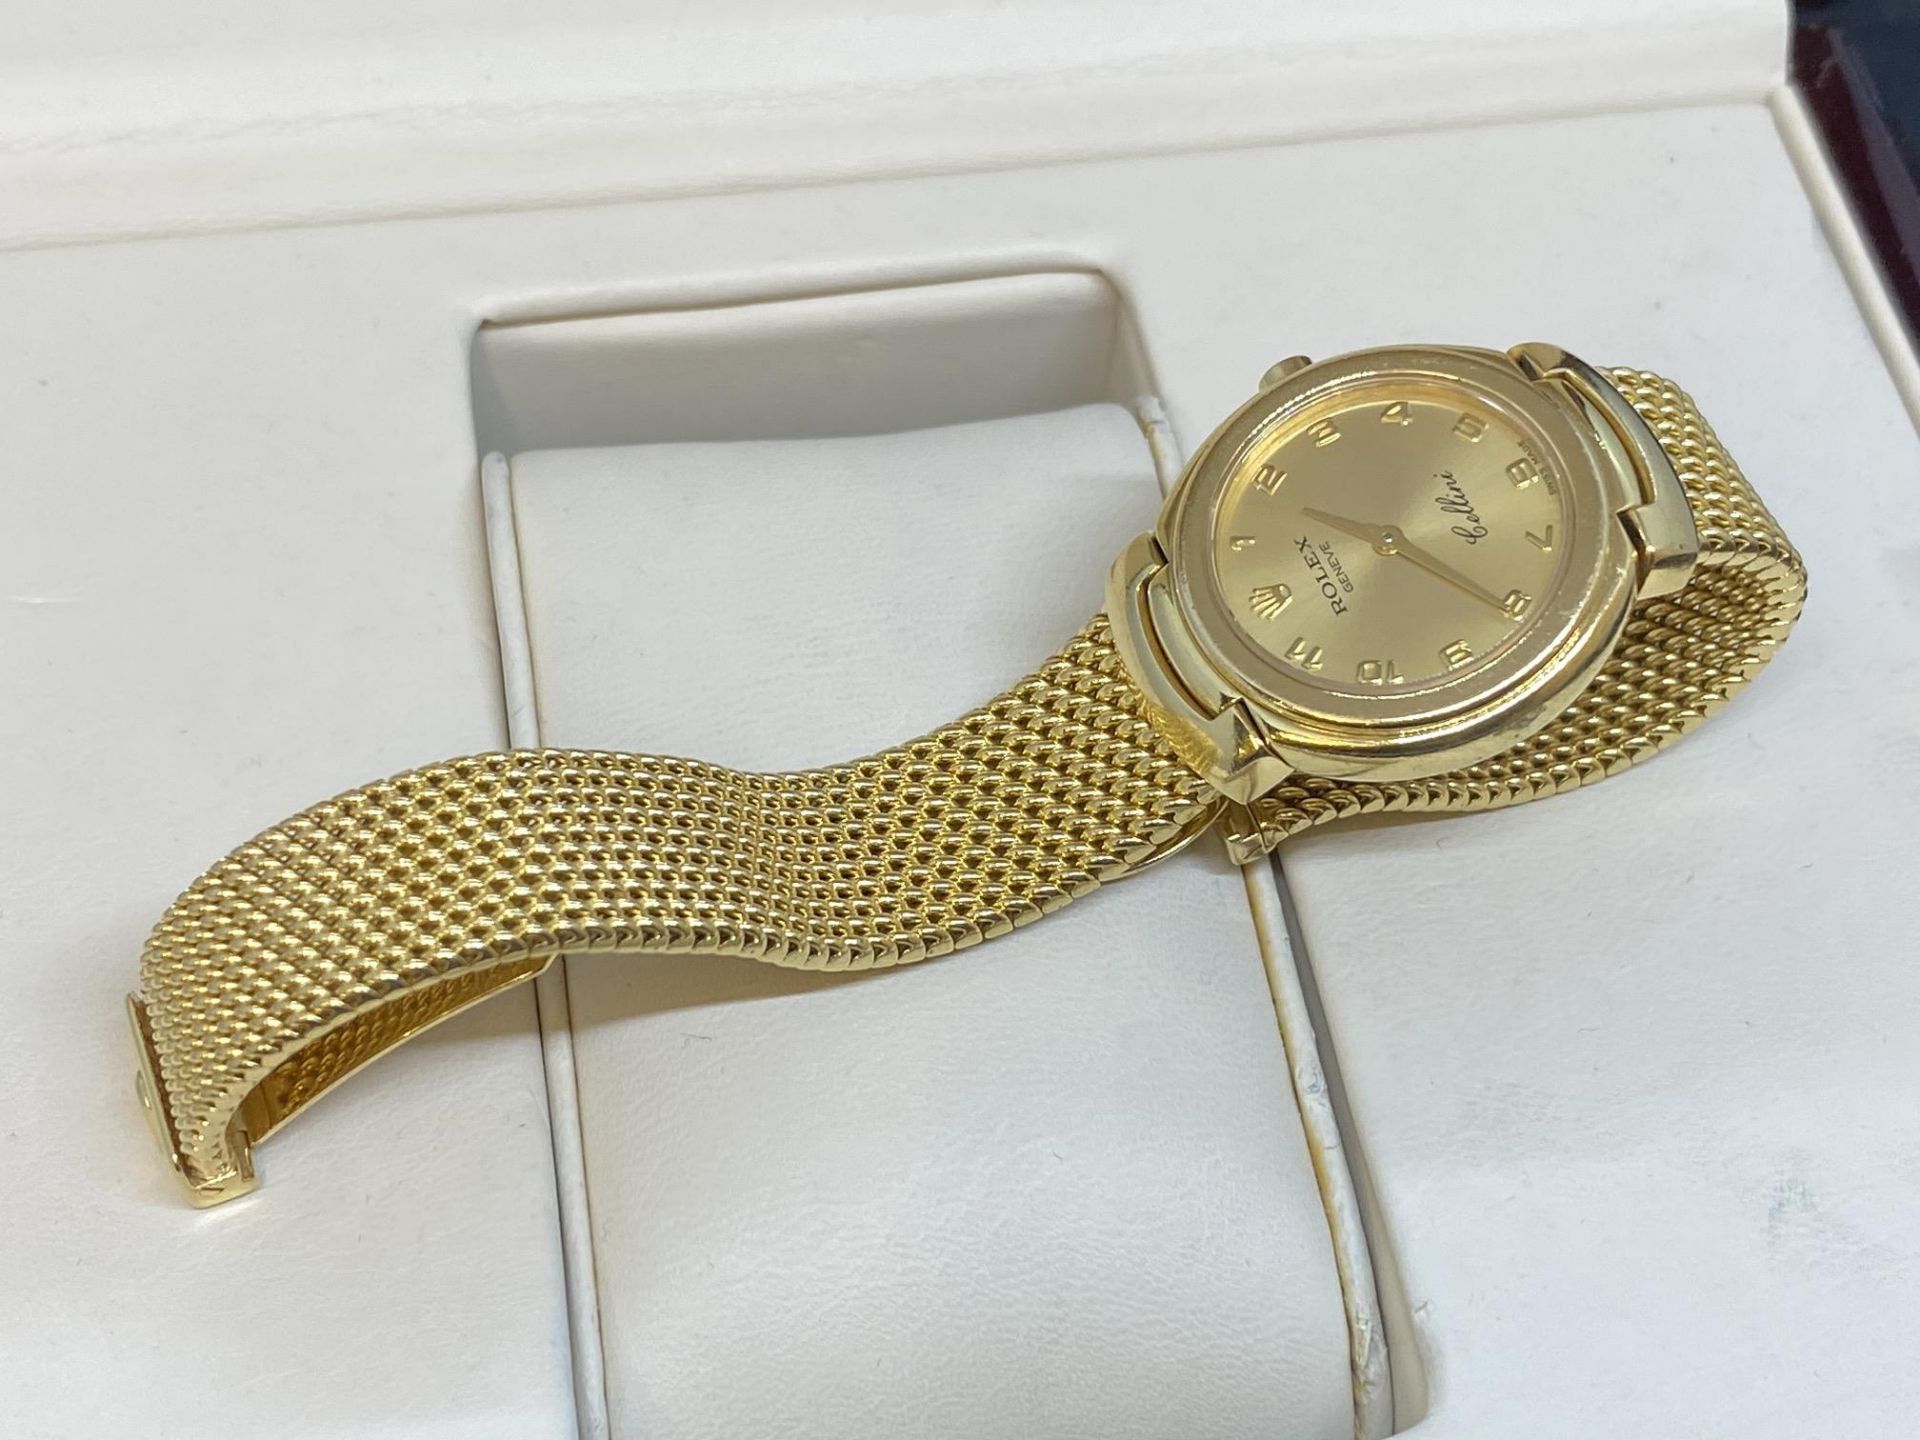 18ct GOLD ROLEX CELLINI WATCH - 74 GRAMS - Image 2 of 8